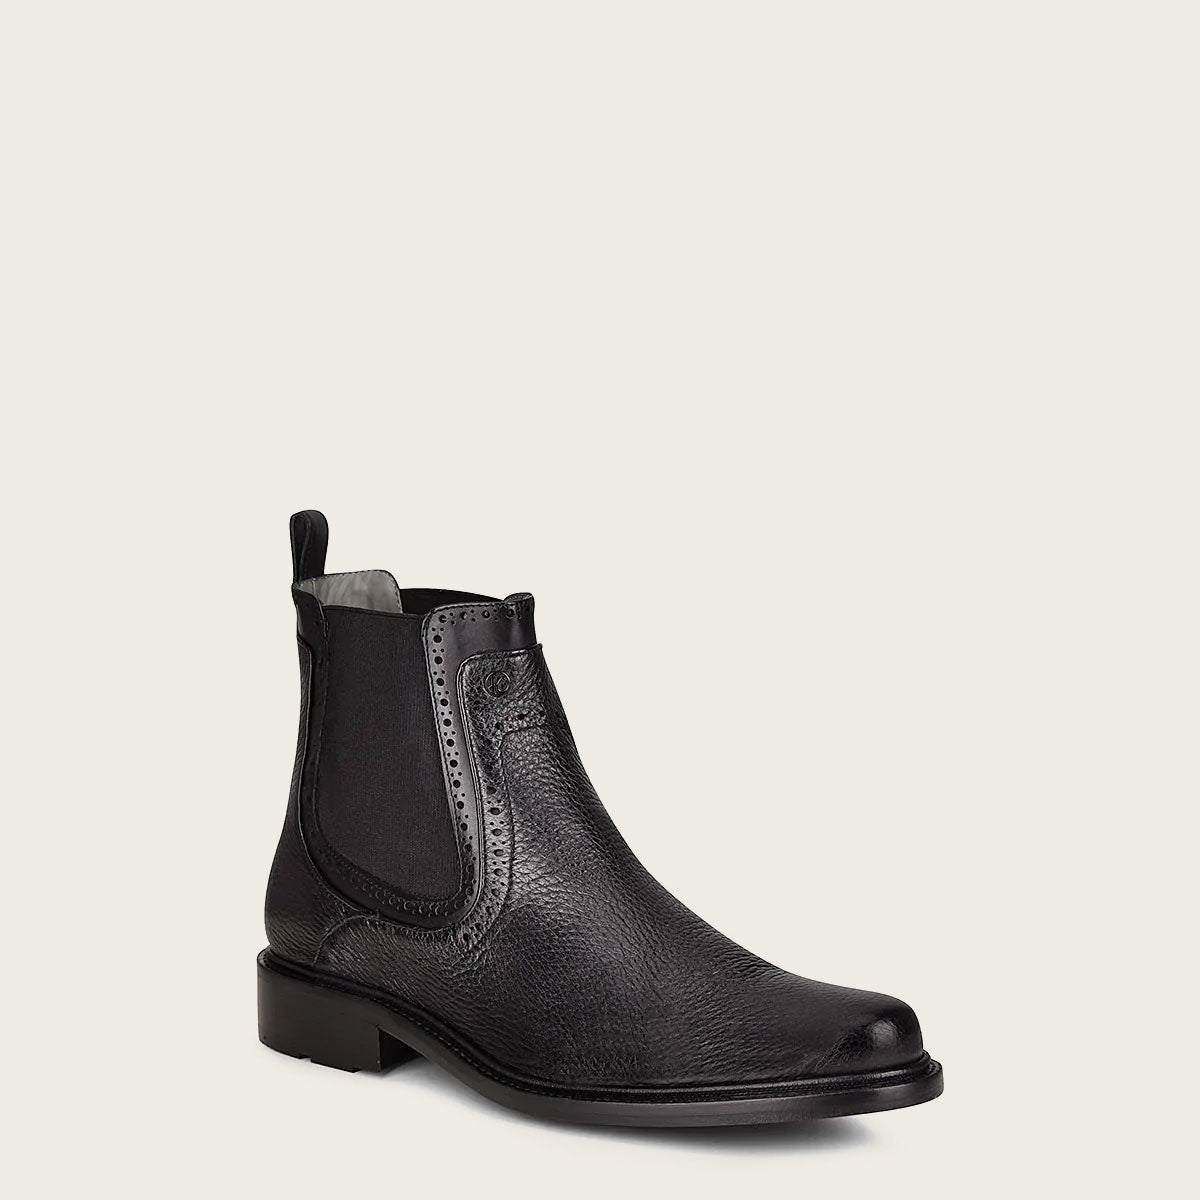 Image of a sleek and minimalistic black deer bootie, perfect for any outfit.